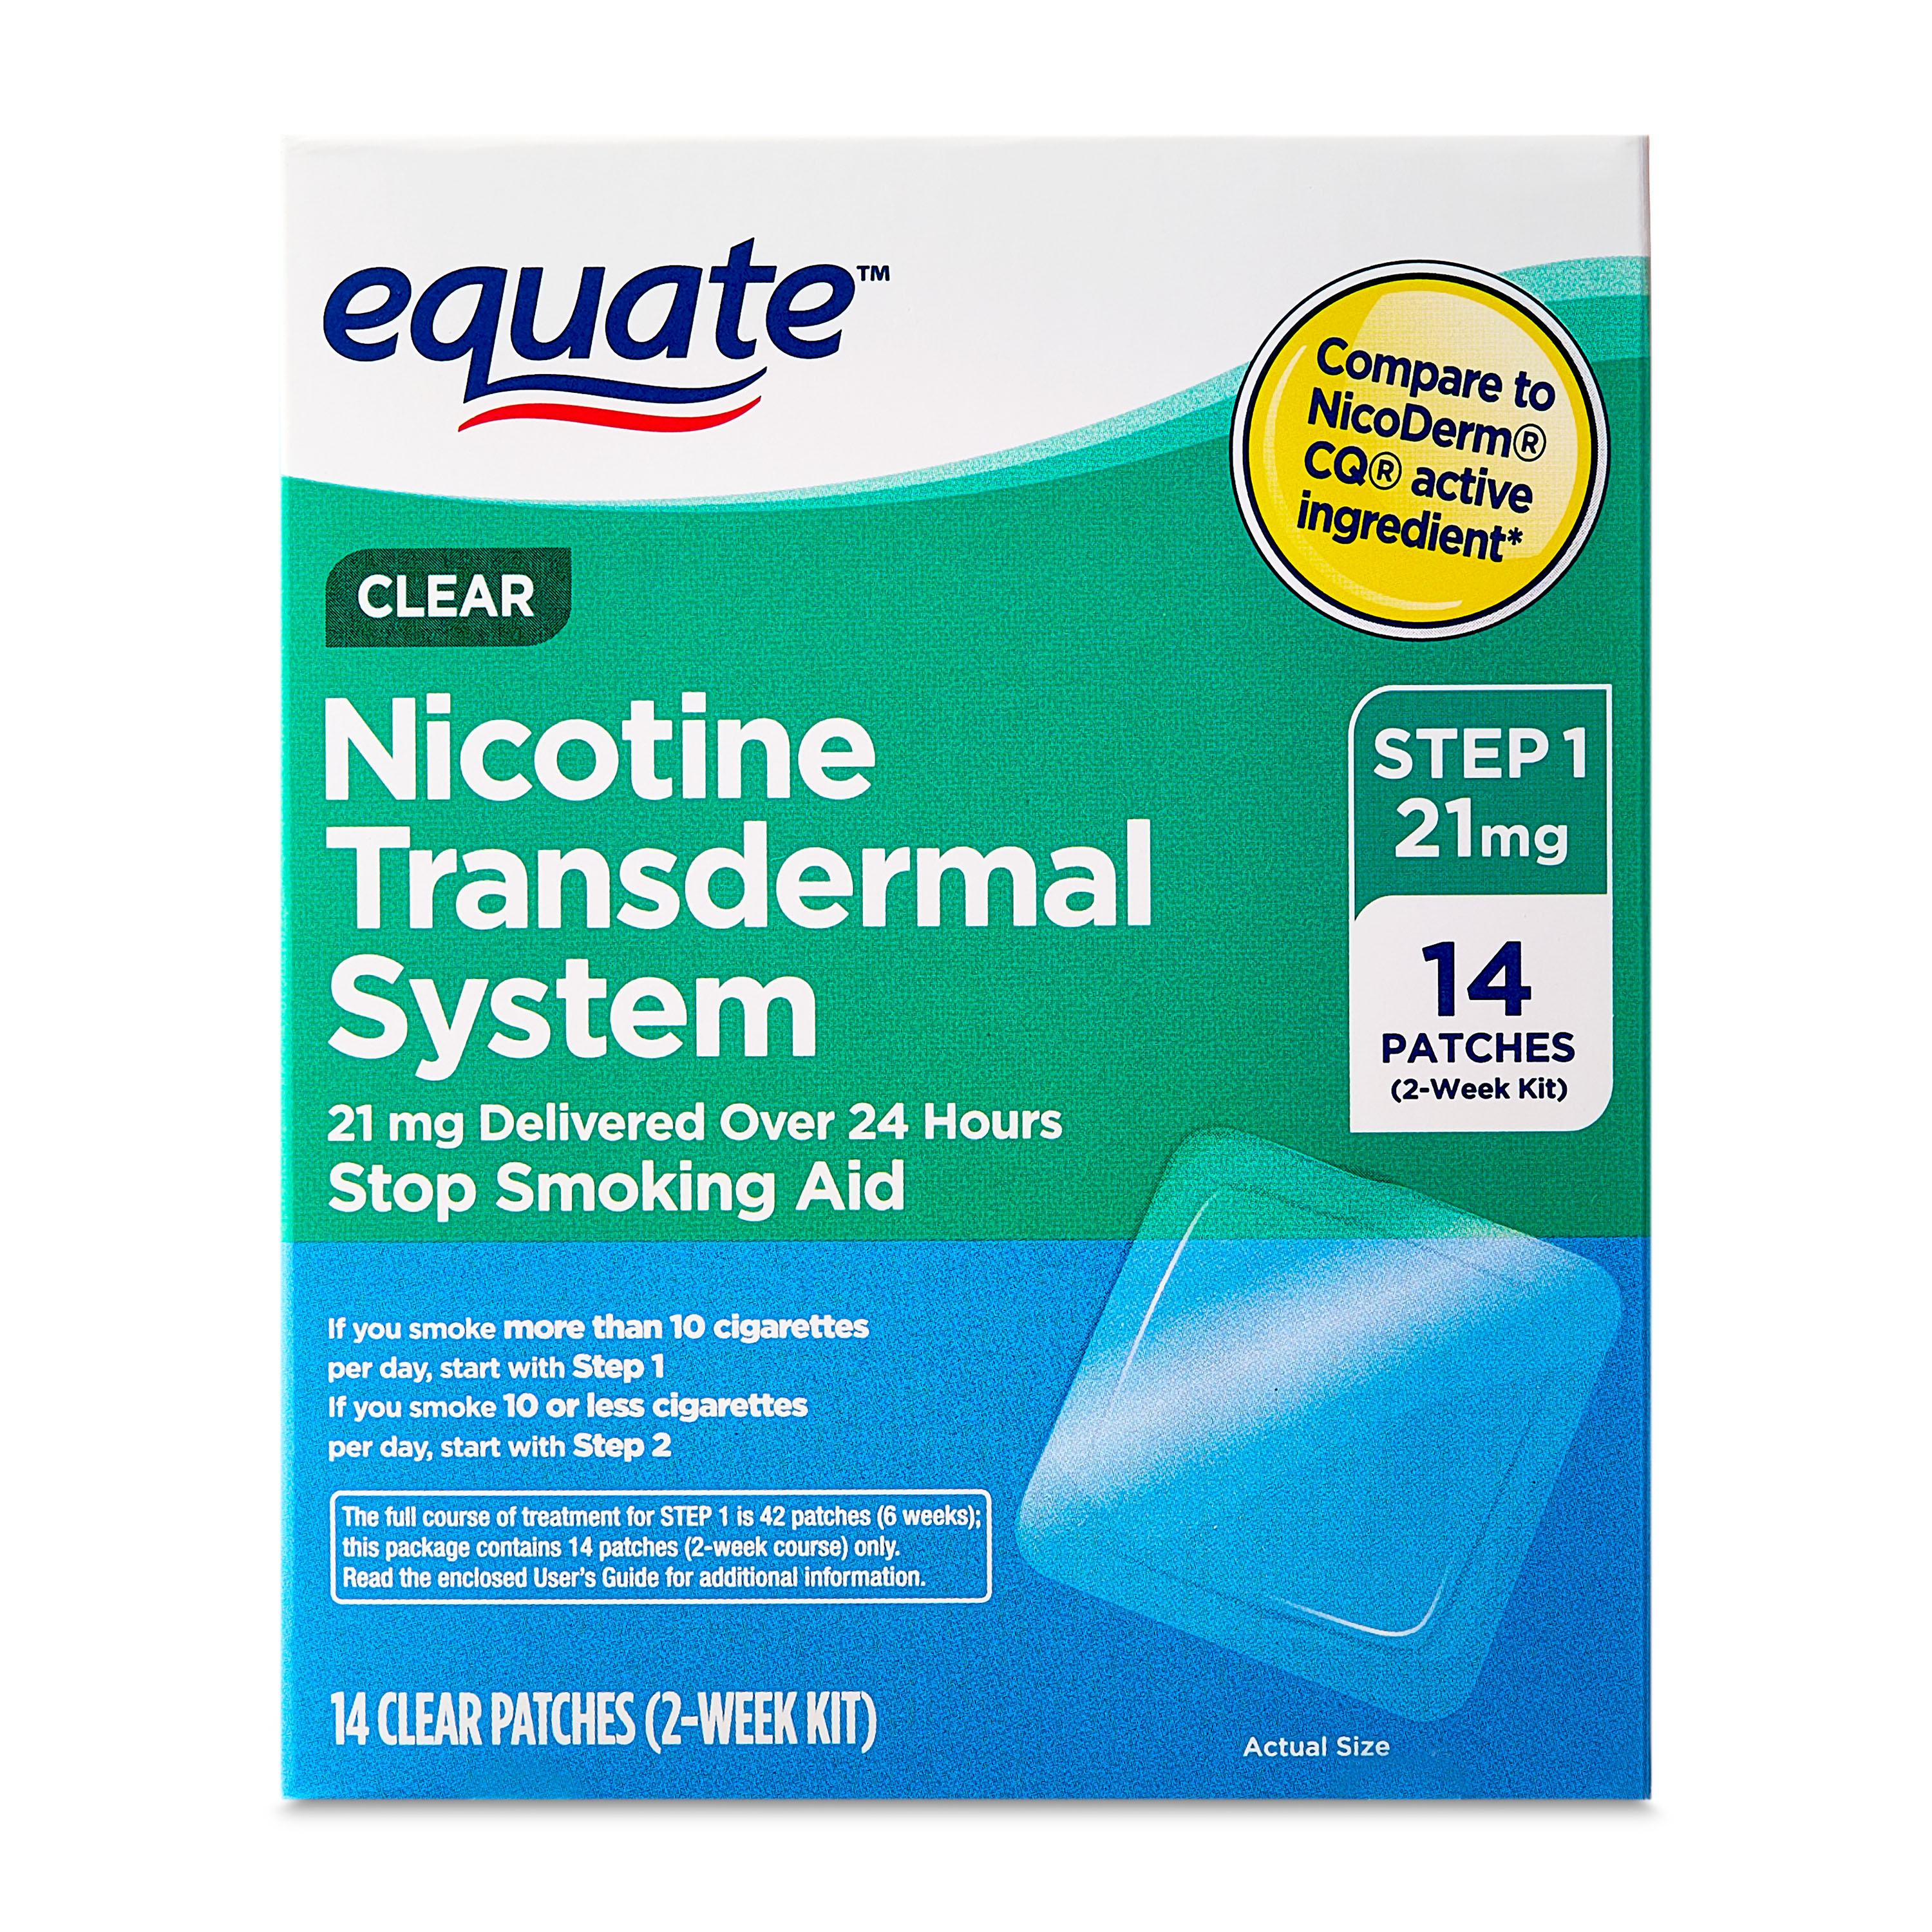 Equate Nicotine Transdermal System Step 1 Clear Patches, 21 mg, 14 Count - image 1 of 8